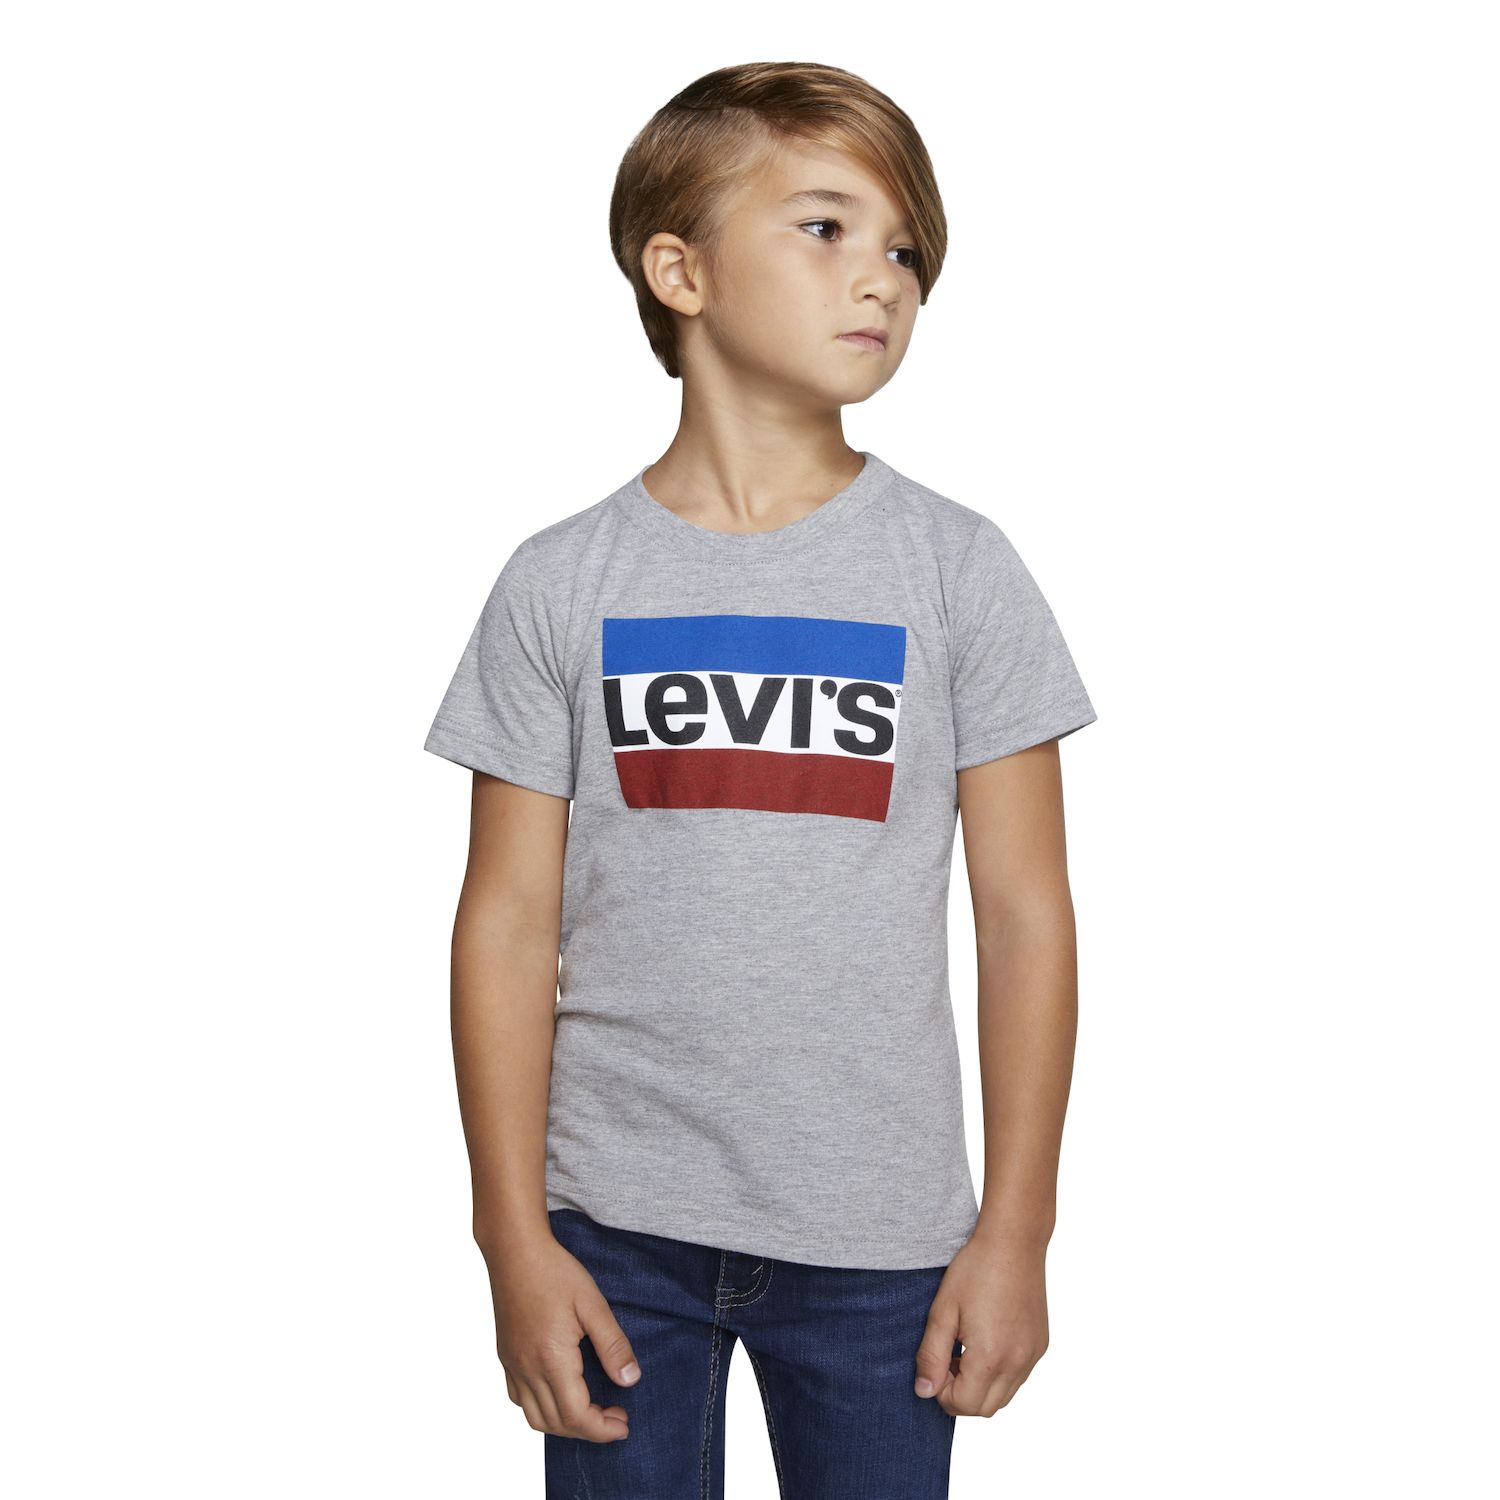 Image for Levi's Boys 8-20 Batwing Tee at Kohl's.